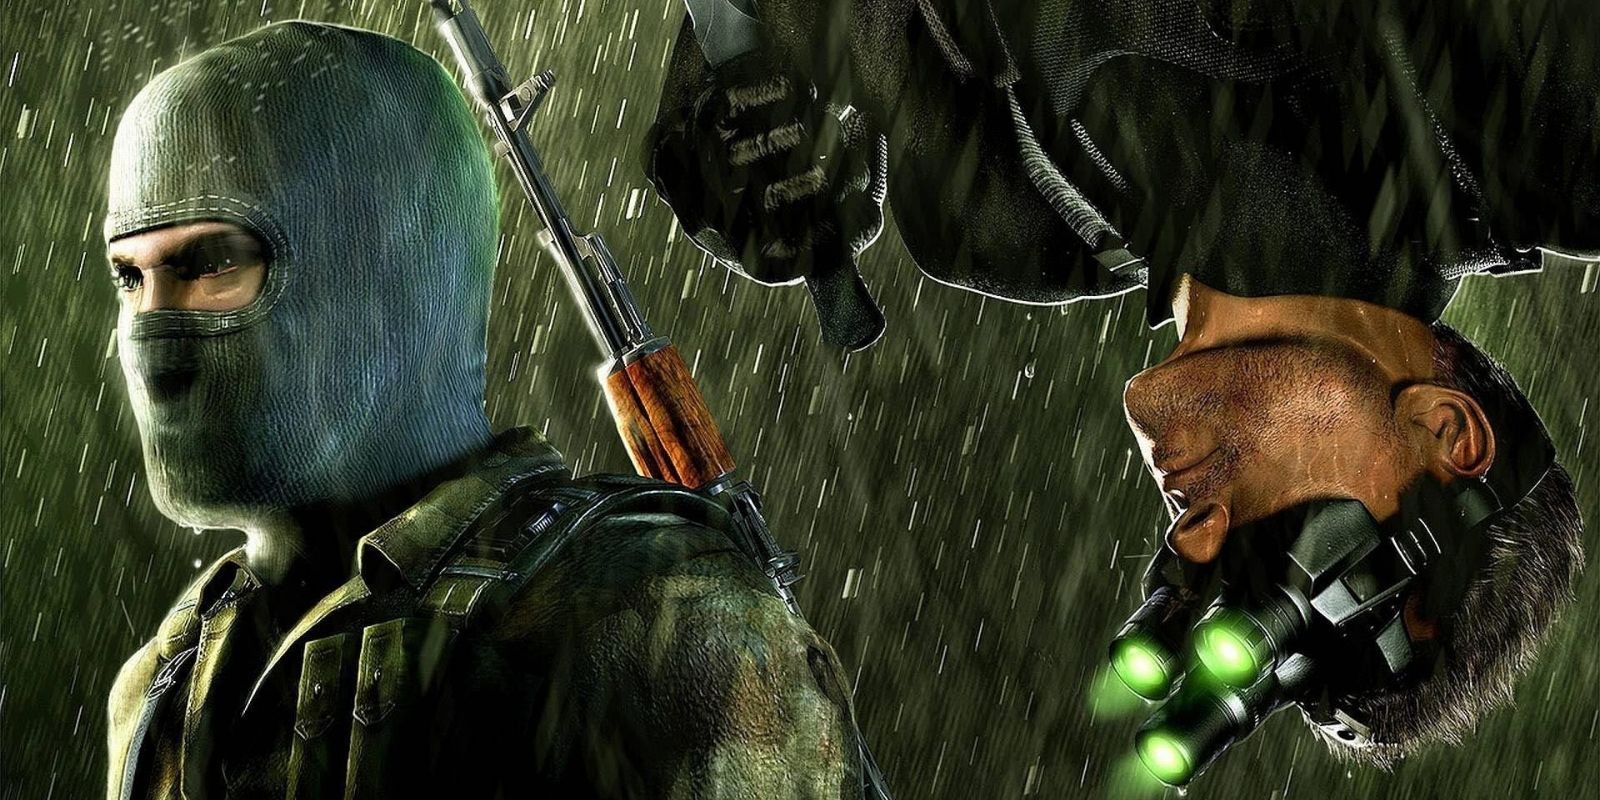 Splinter Cell Remake Release Date and Platforms: Is it coming to